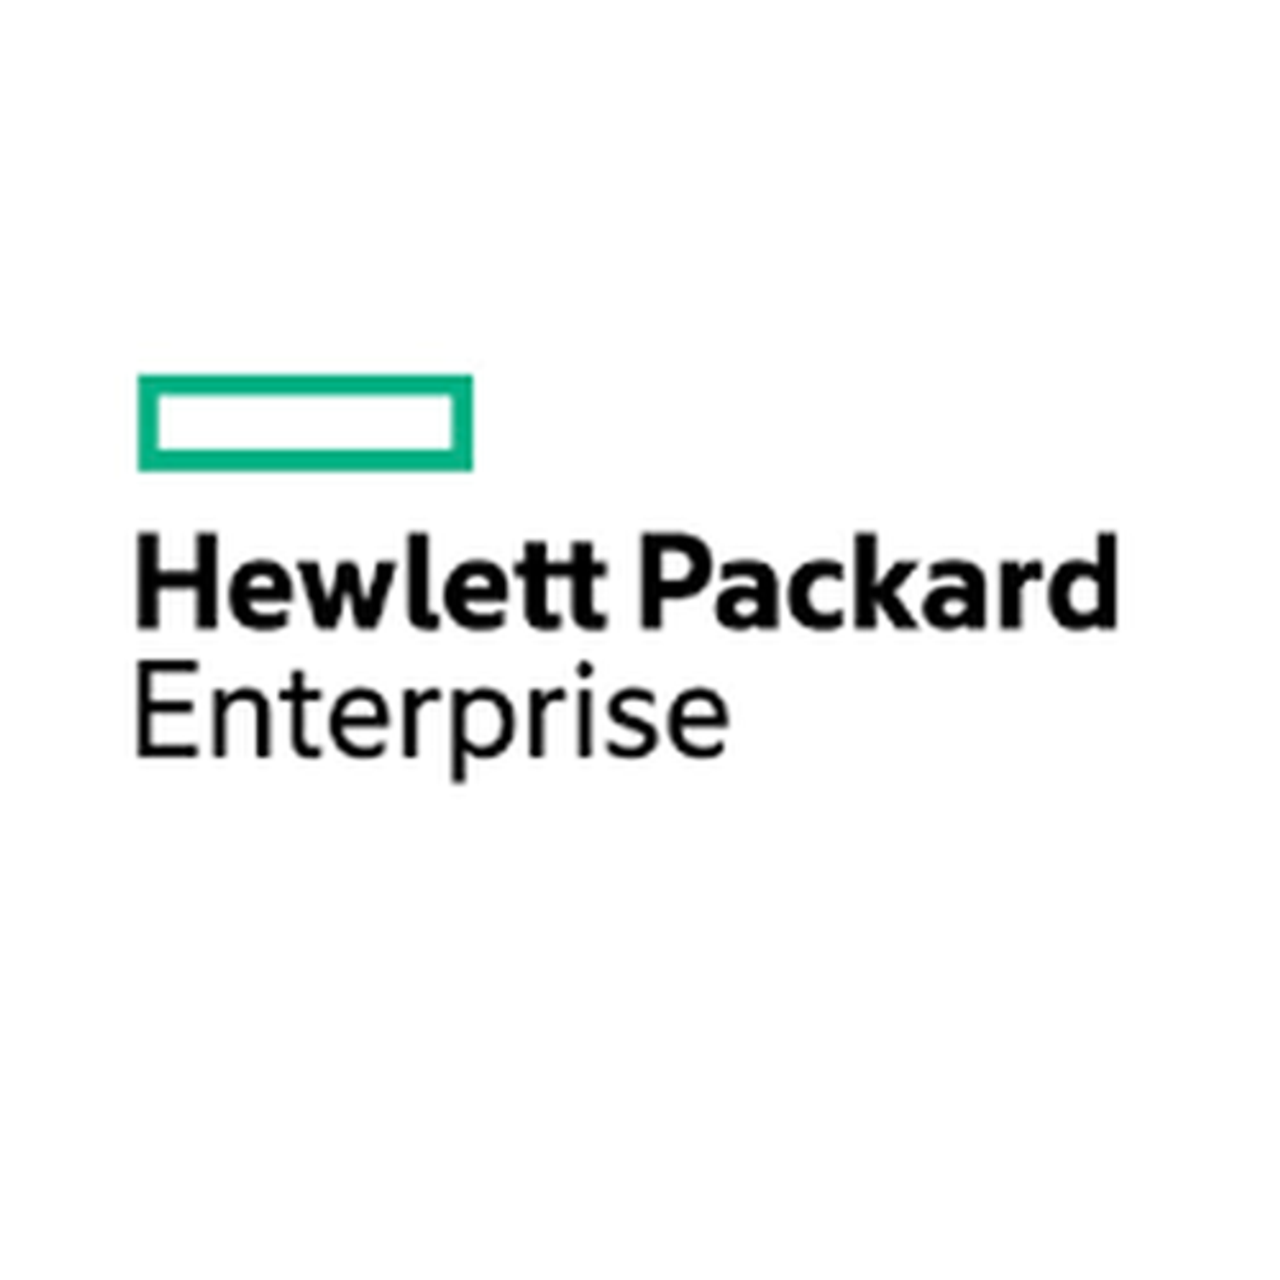 HPE DL385 Gen10+ 8LFF Reman CTO Server Asia Pacific-English Localization (HSSL Sourcing) - HPE Discontinued Product)